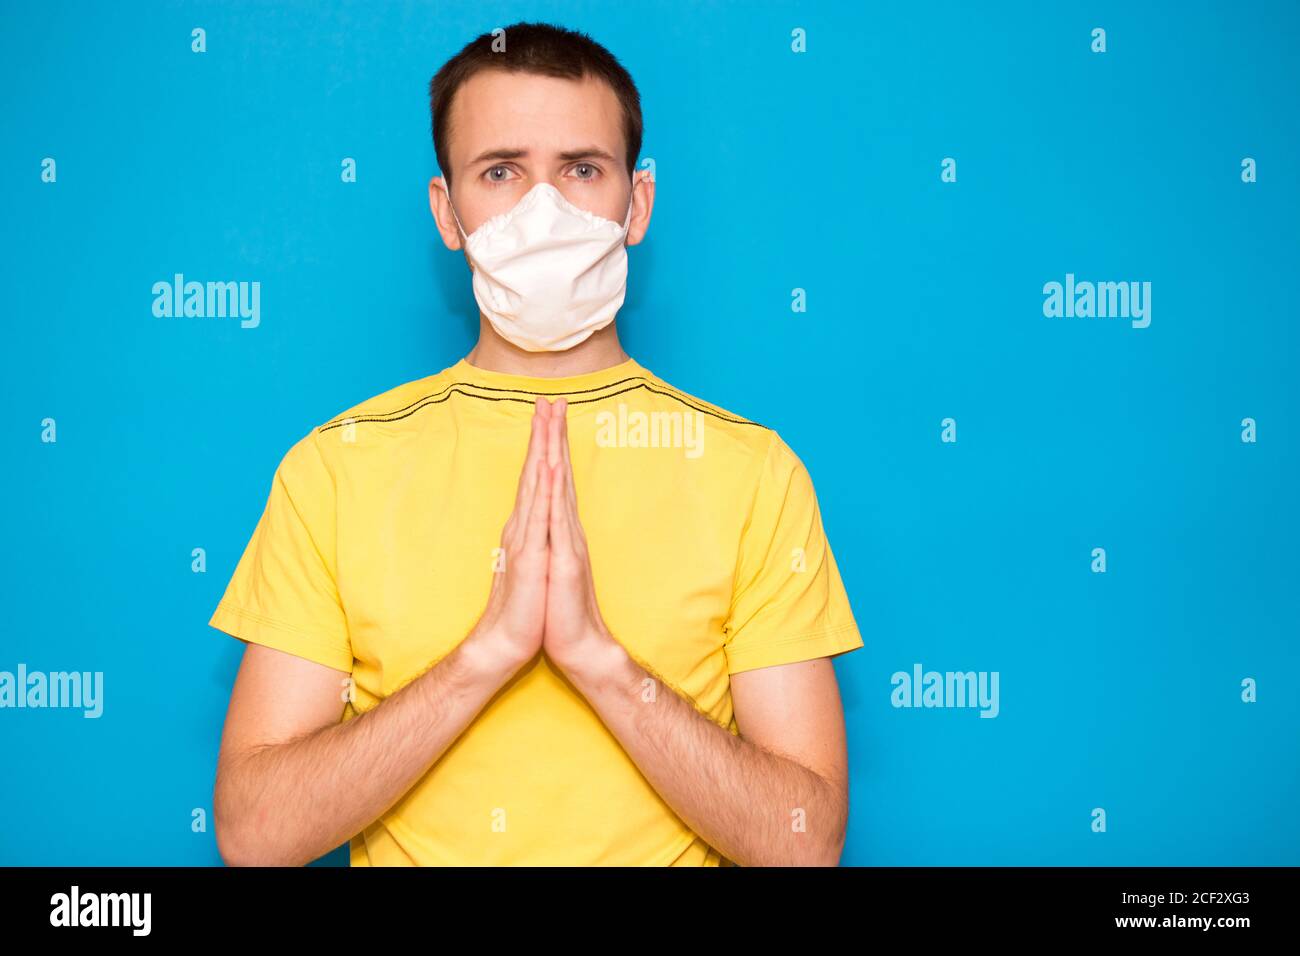 Portrait of young man in yellow t-shirt wearing protective mask against coronavirus, doing pray gesture for health against corona virus is quickly ove Stock Photo